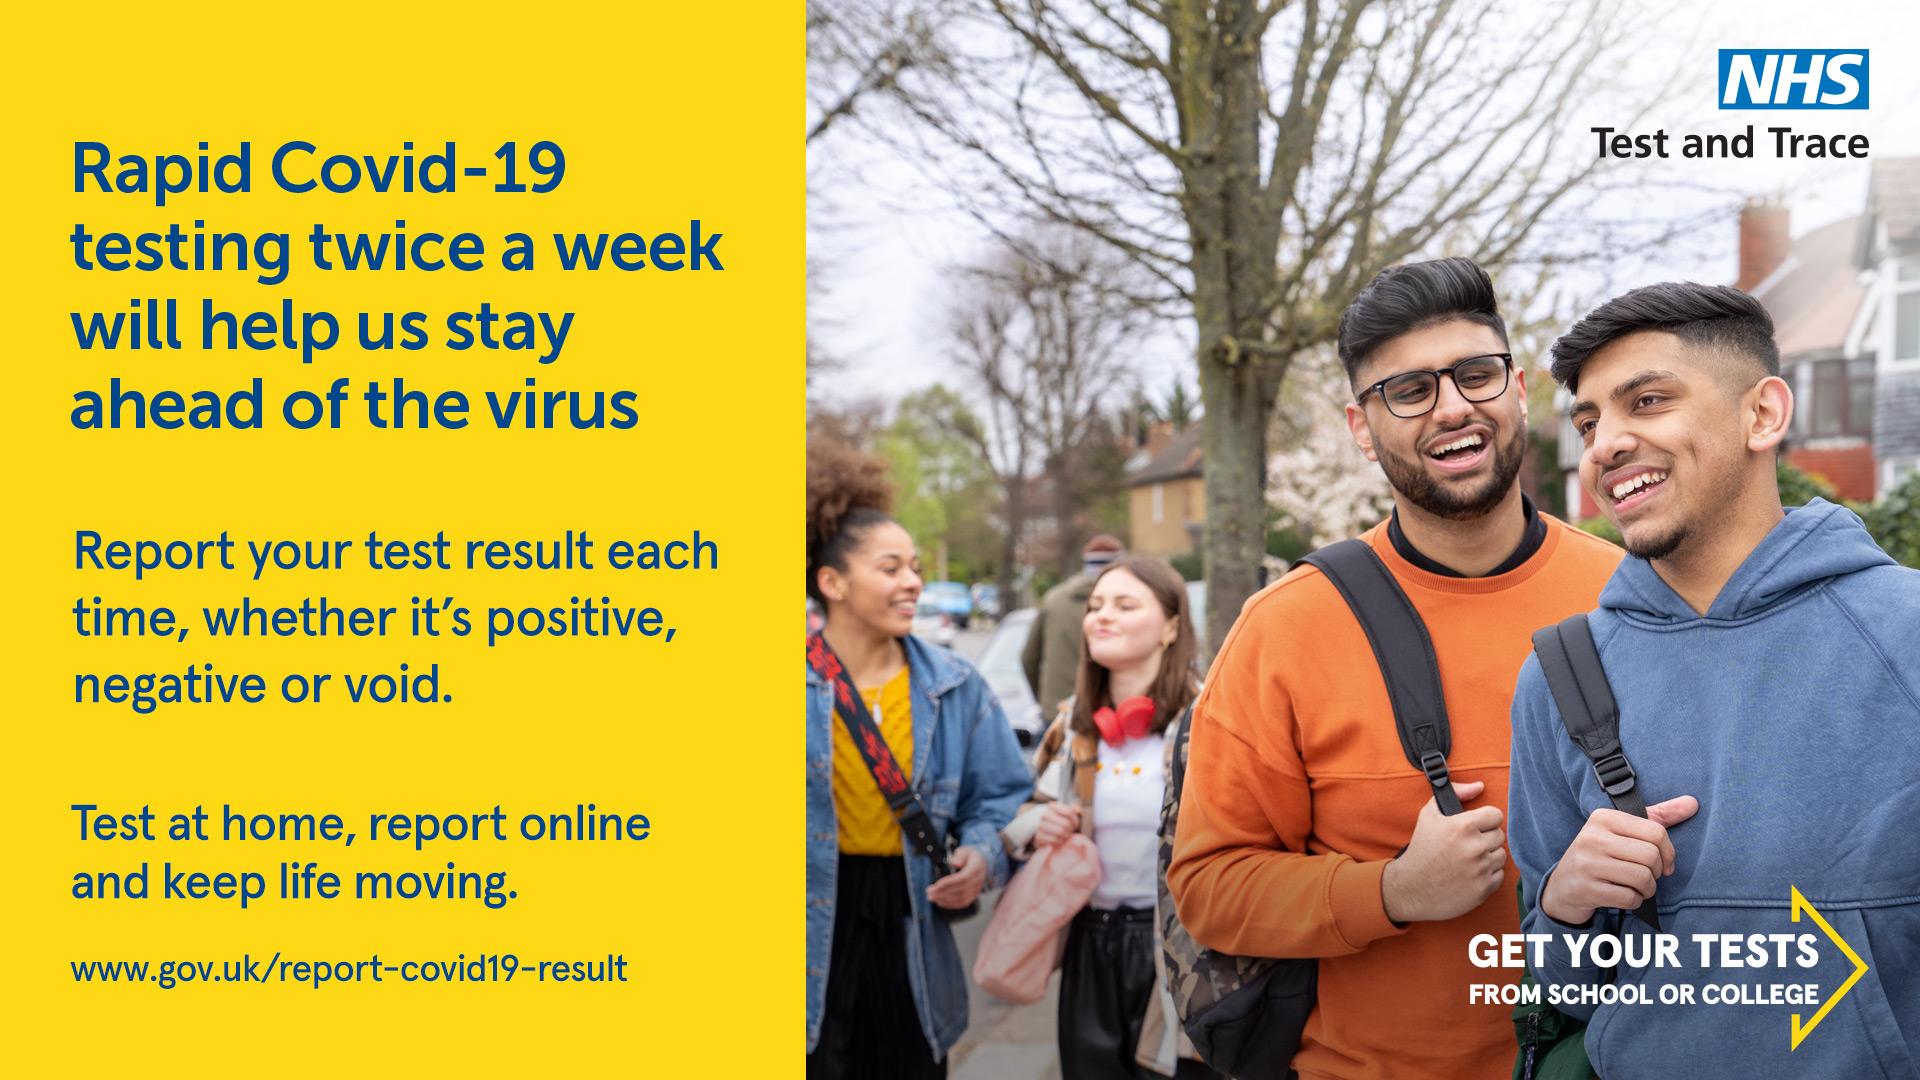 Graphic text RApid Covid-19 testing twice a week will help is stay ahead of the virus\\nReport your test result each time, whether it's positive, negative or void.\\nTest at home, report online and keep life moving\\nwww.gov.uk/report-covid19-result